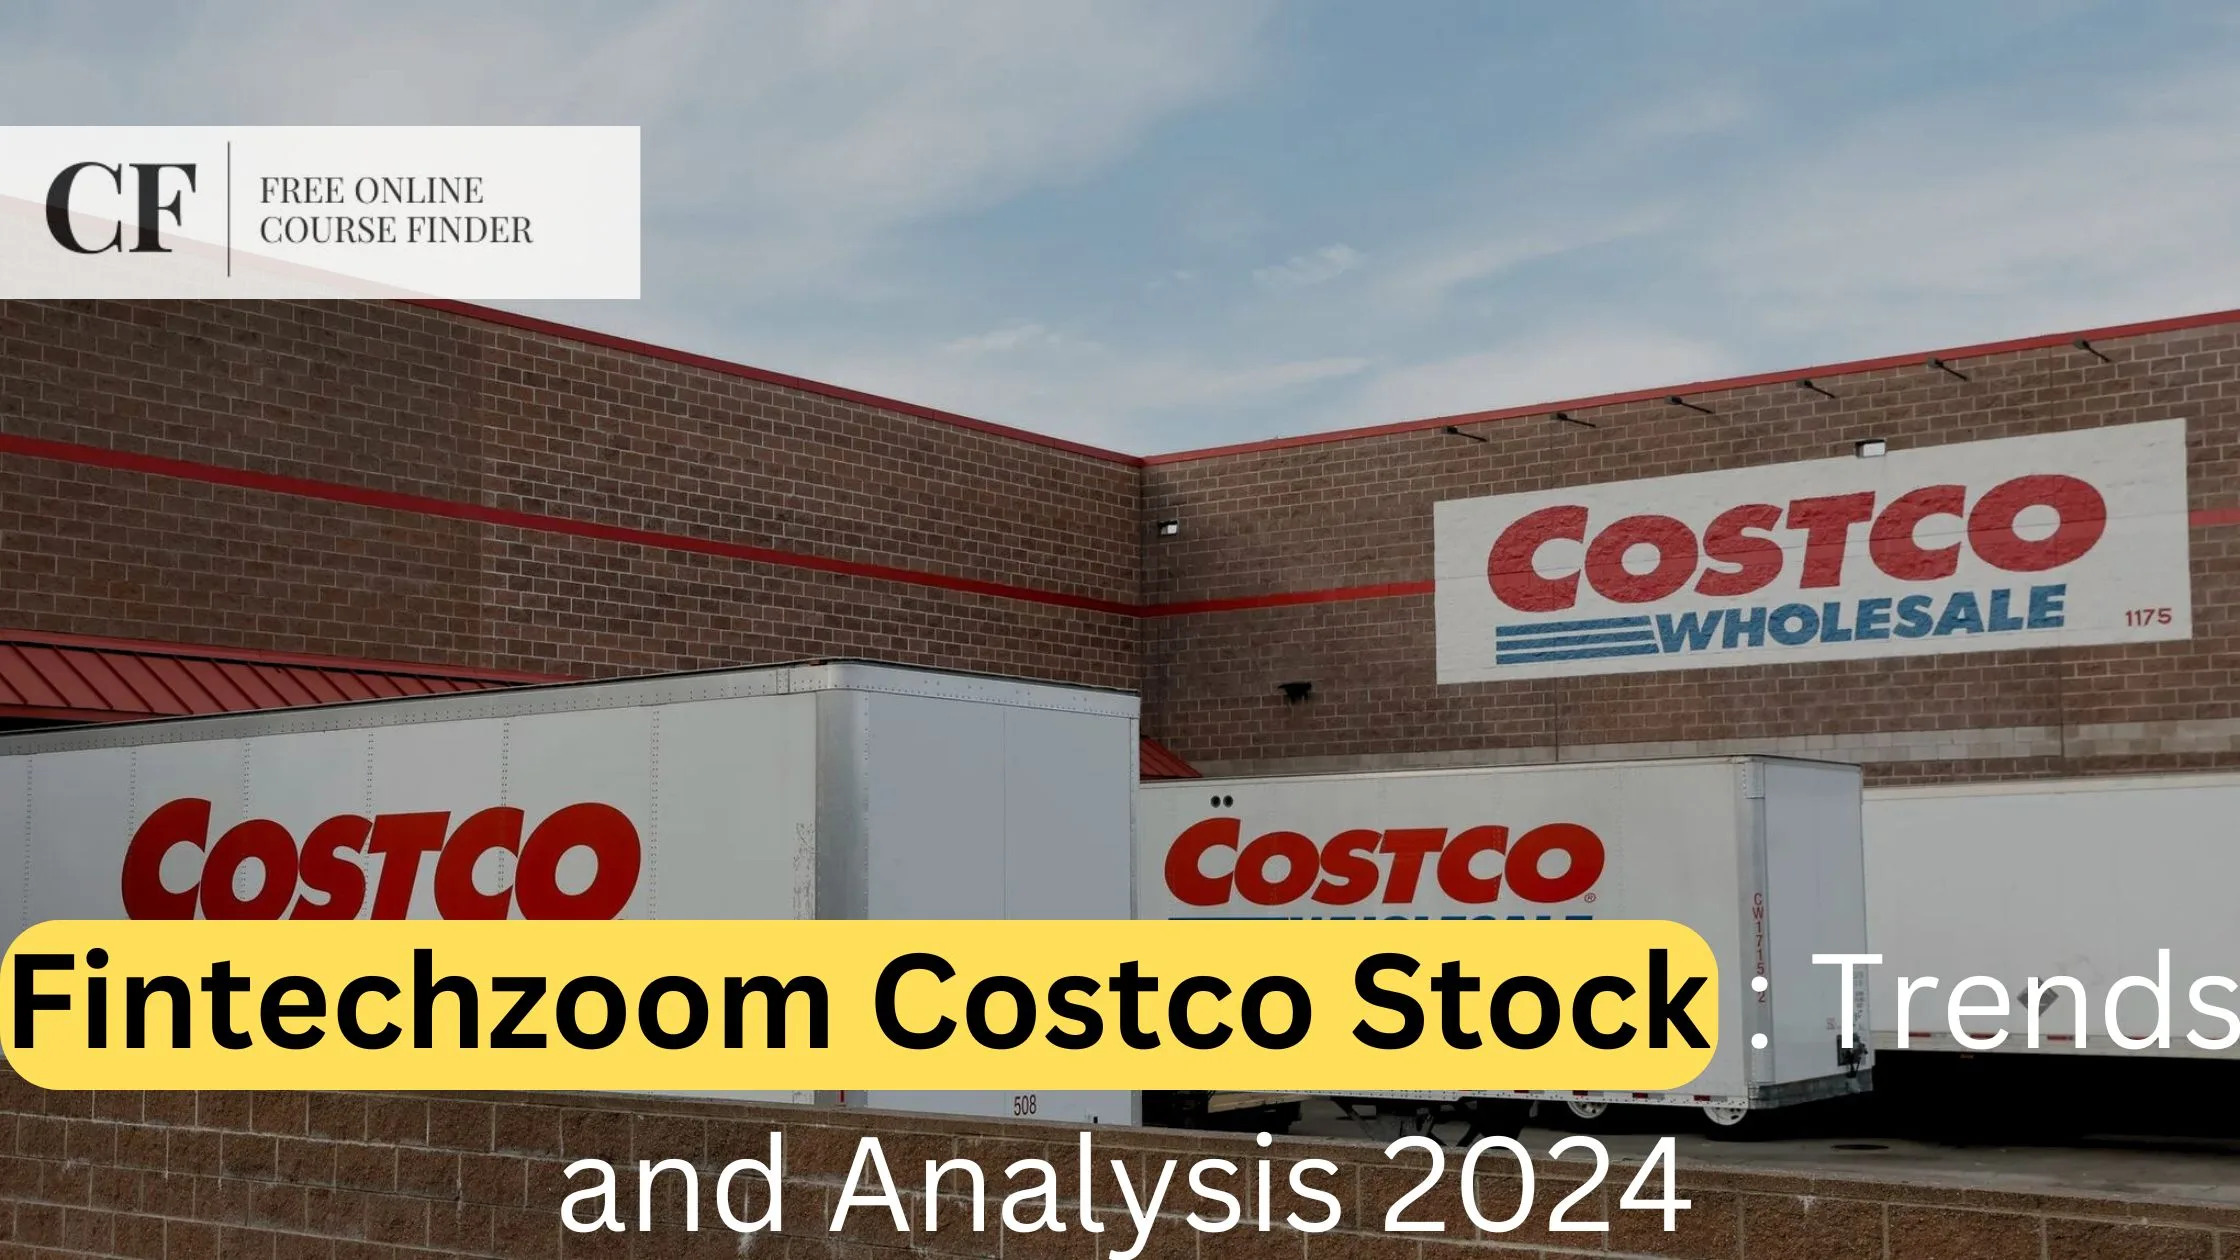 Fintechzoom Costco Stock: Trends and Analysis 2024